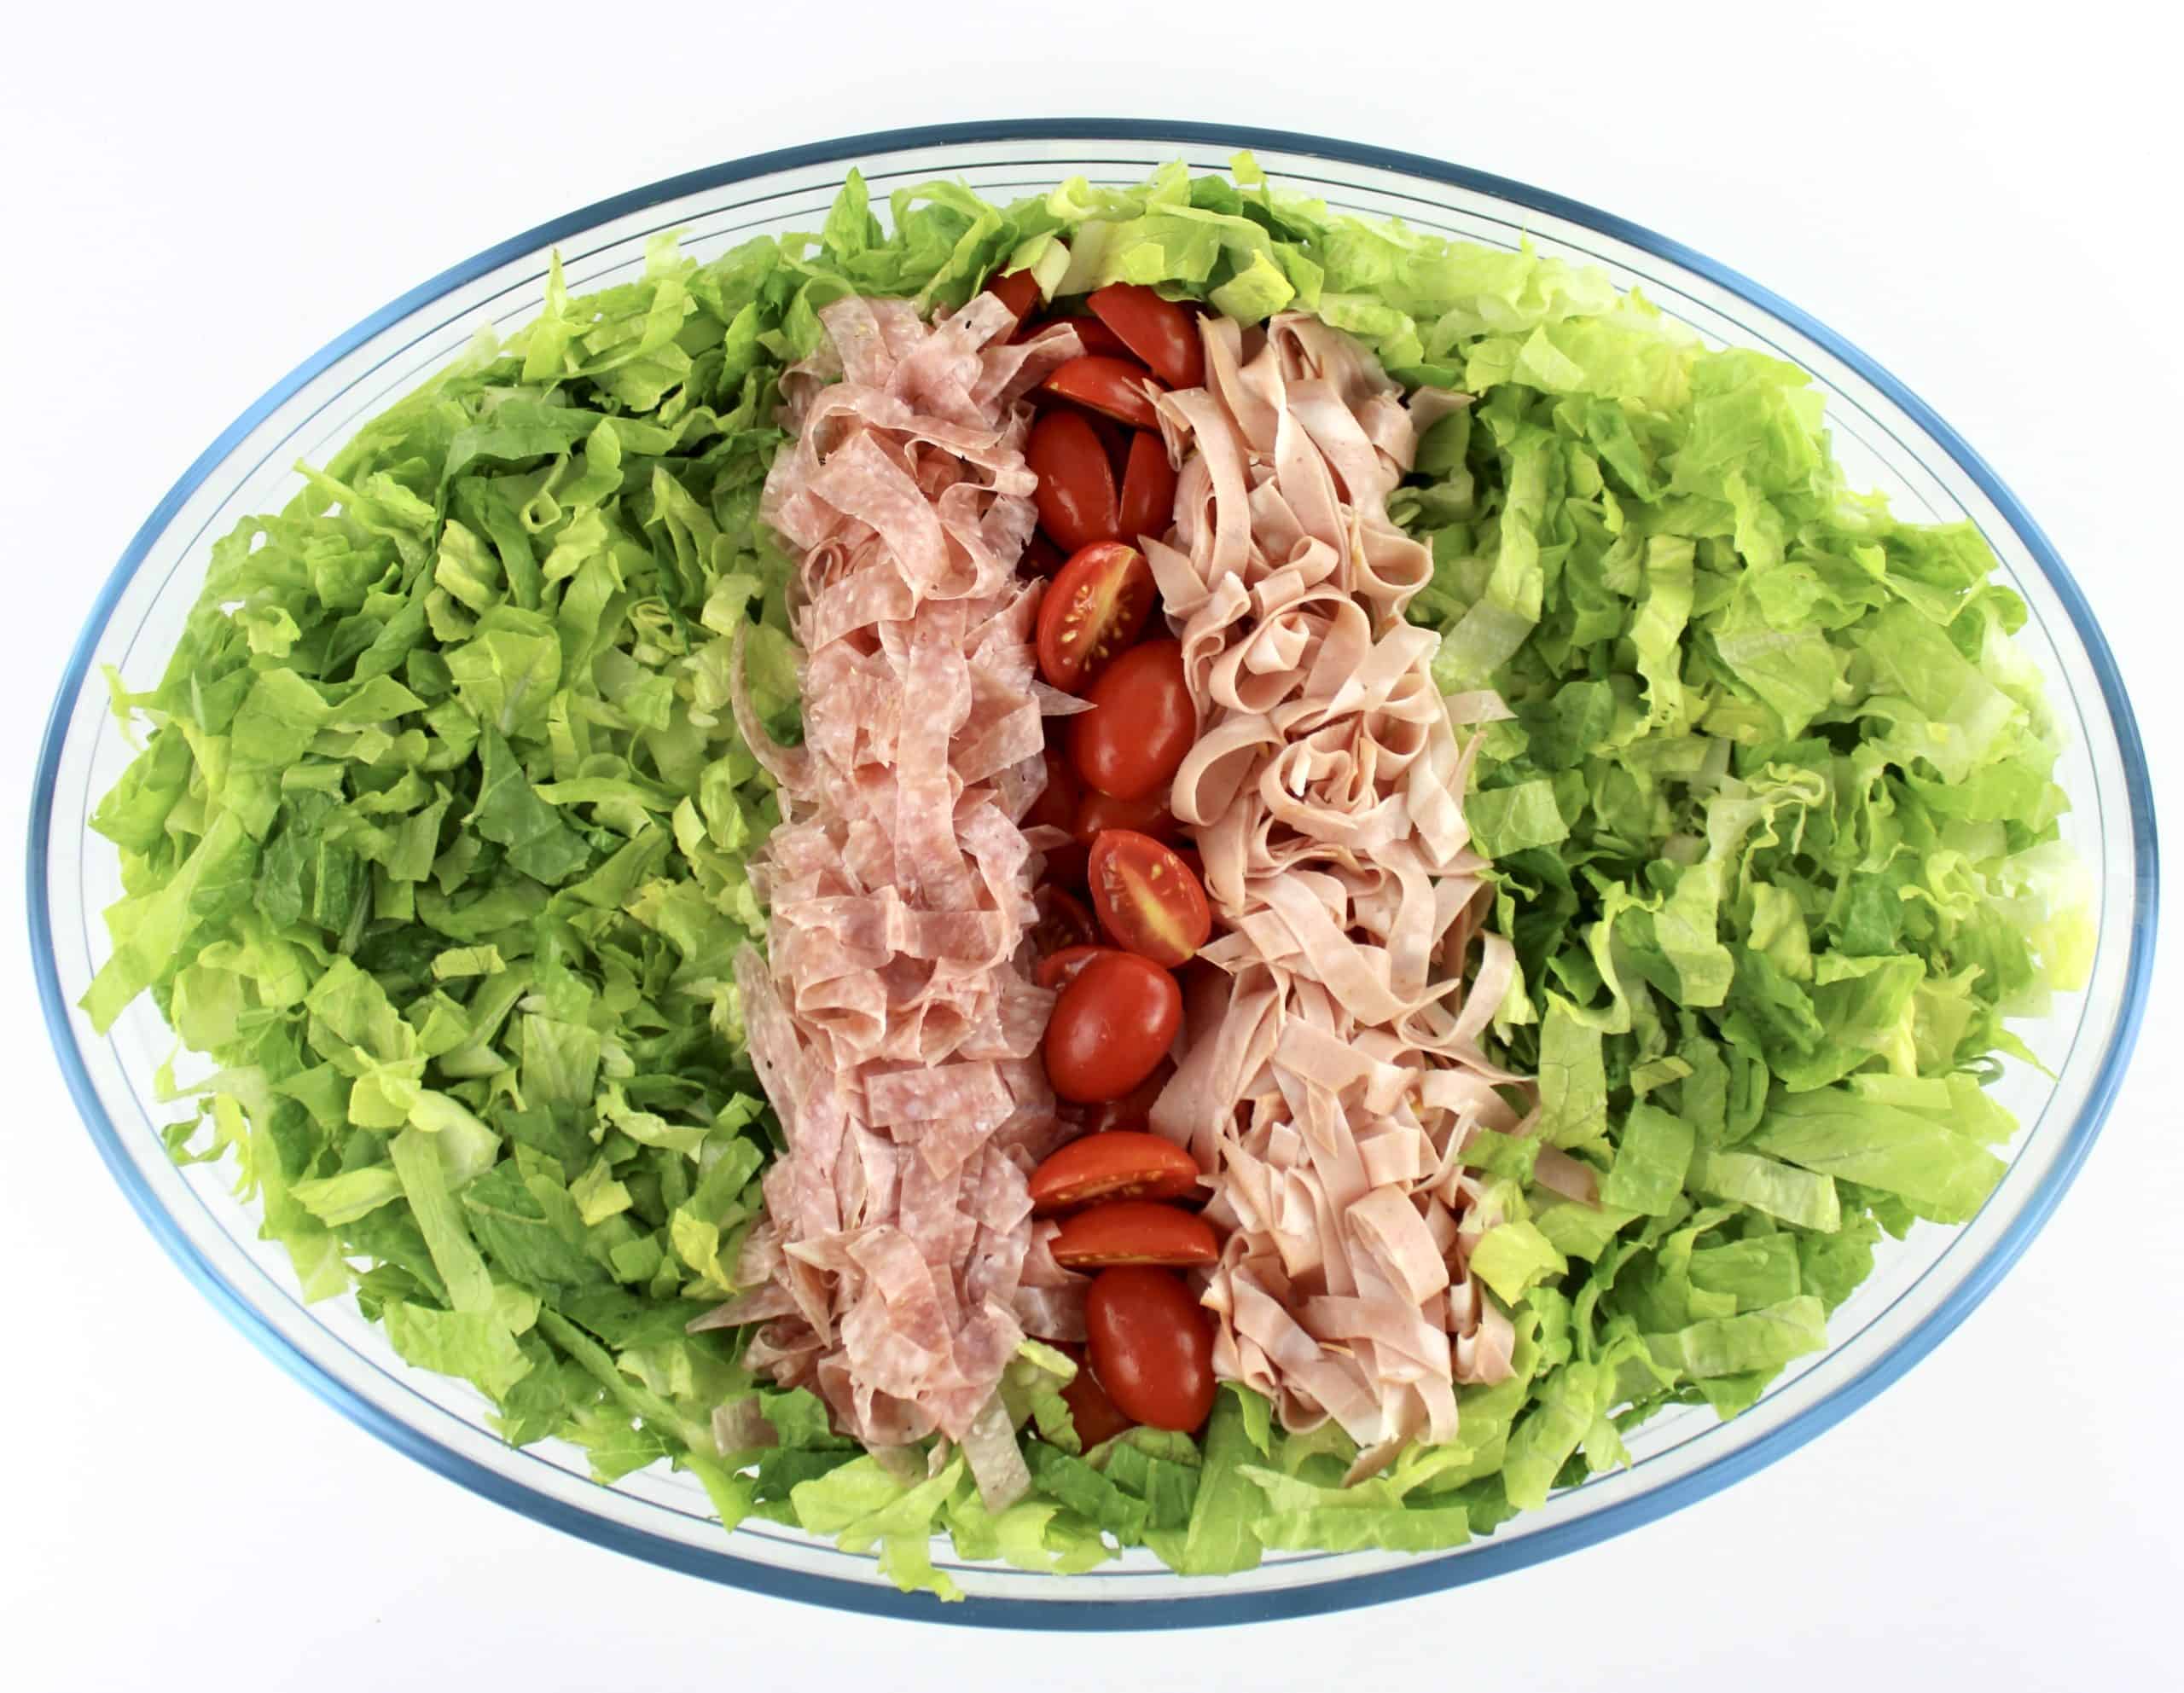 shredded lettuce in oval glass bowl with rows of tomatoes and shredded salami and mortadella in the center